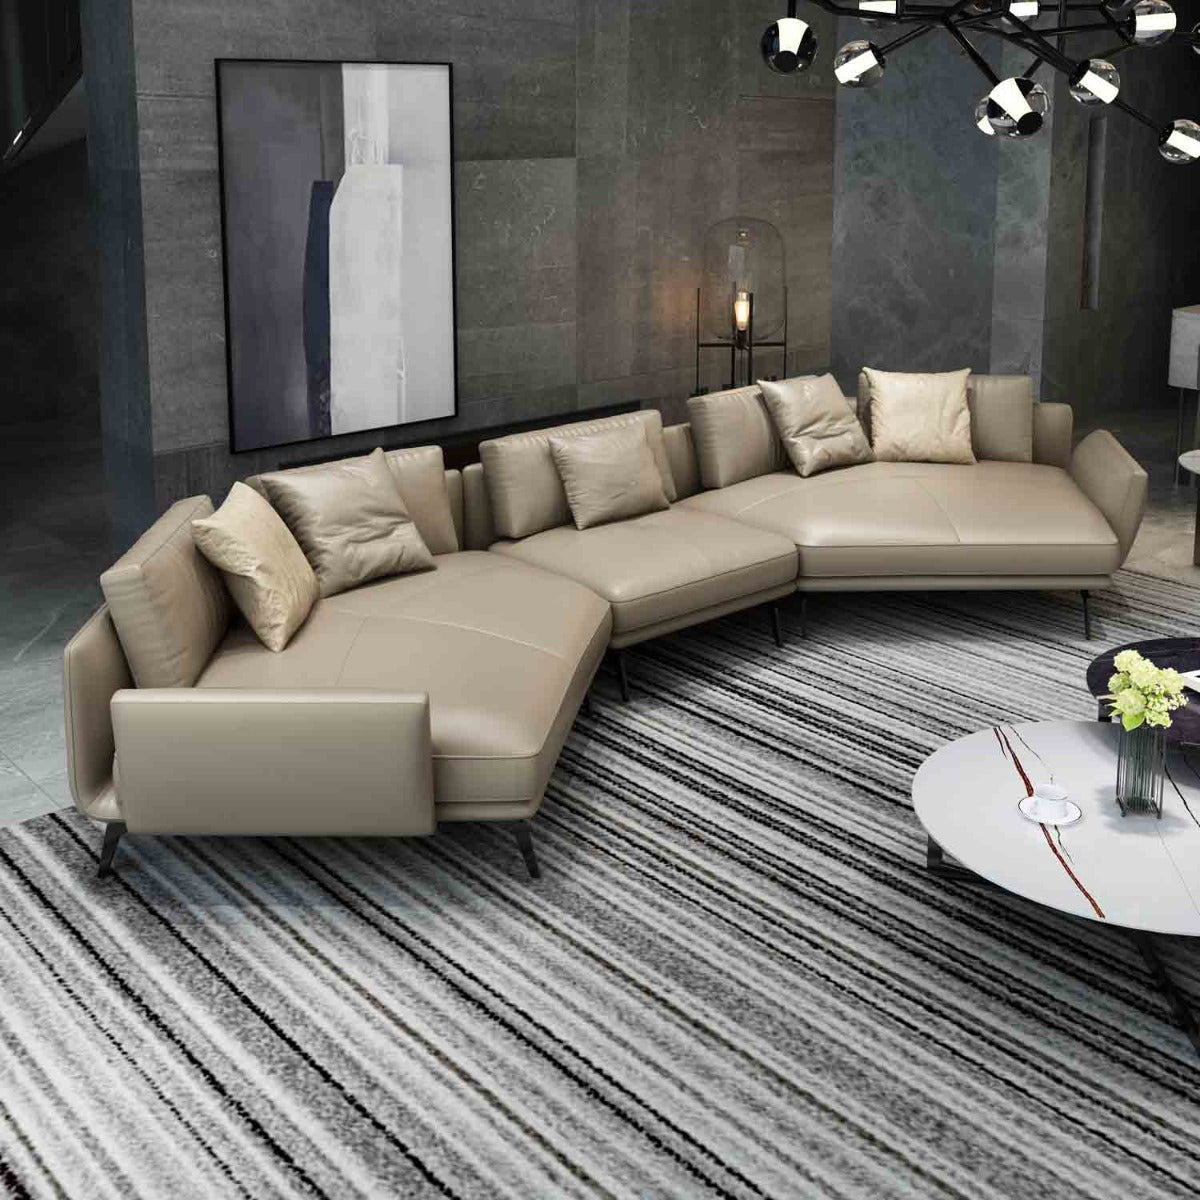 European Furniture - Venere 5 Seater Sectional in Tan - 65554-5S - New Star Living